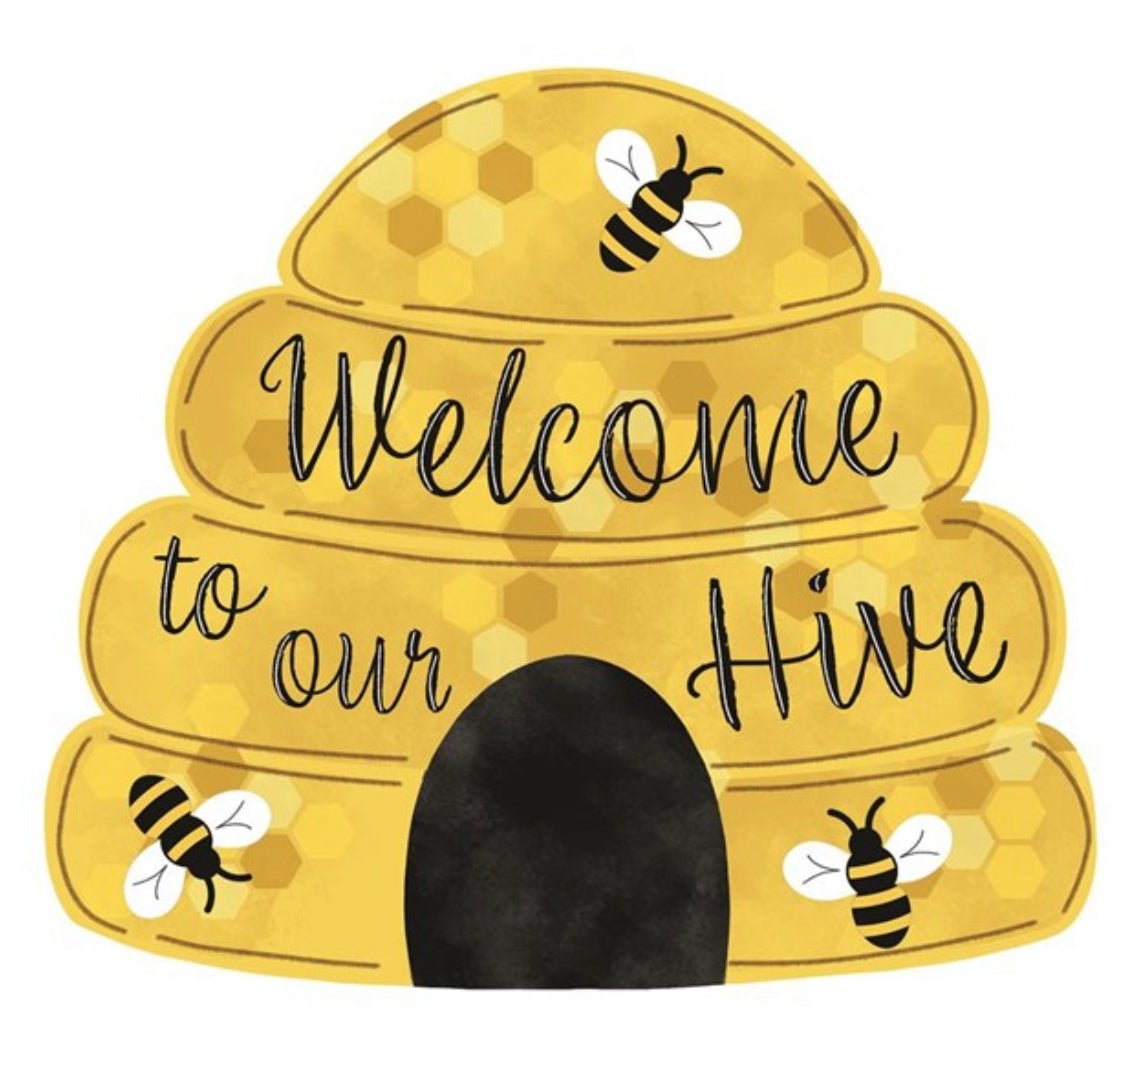 Bee hive embossed metal sign - Greenery Market signs for wreaths